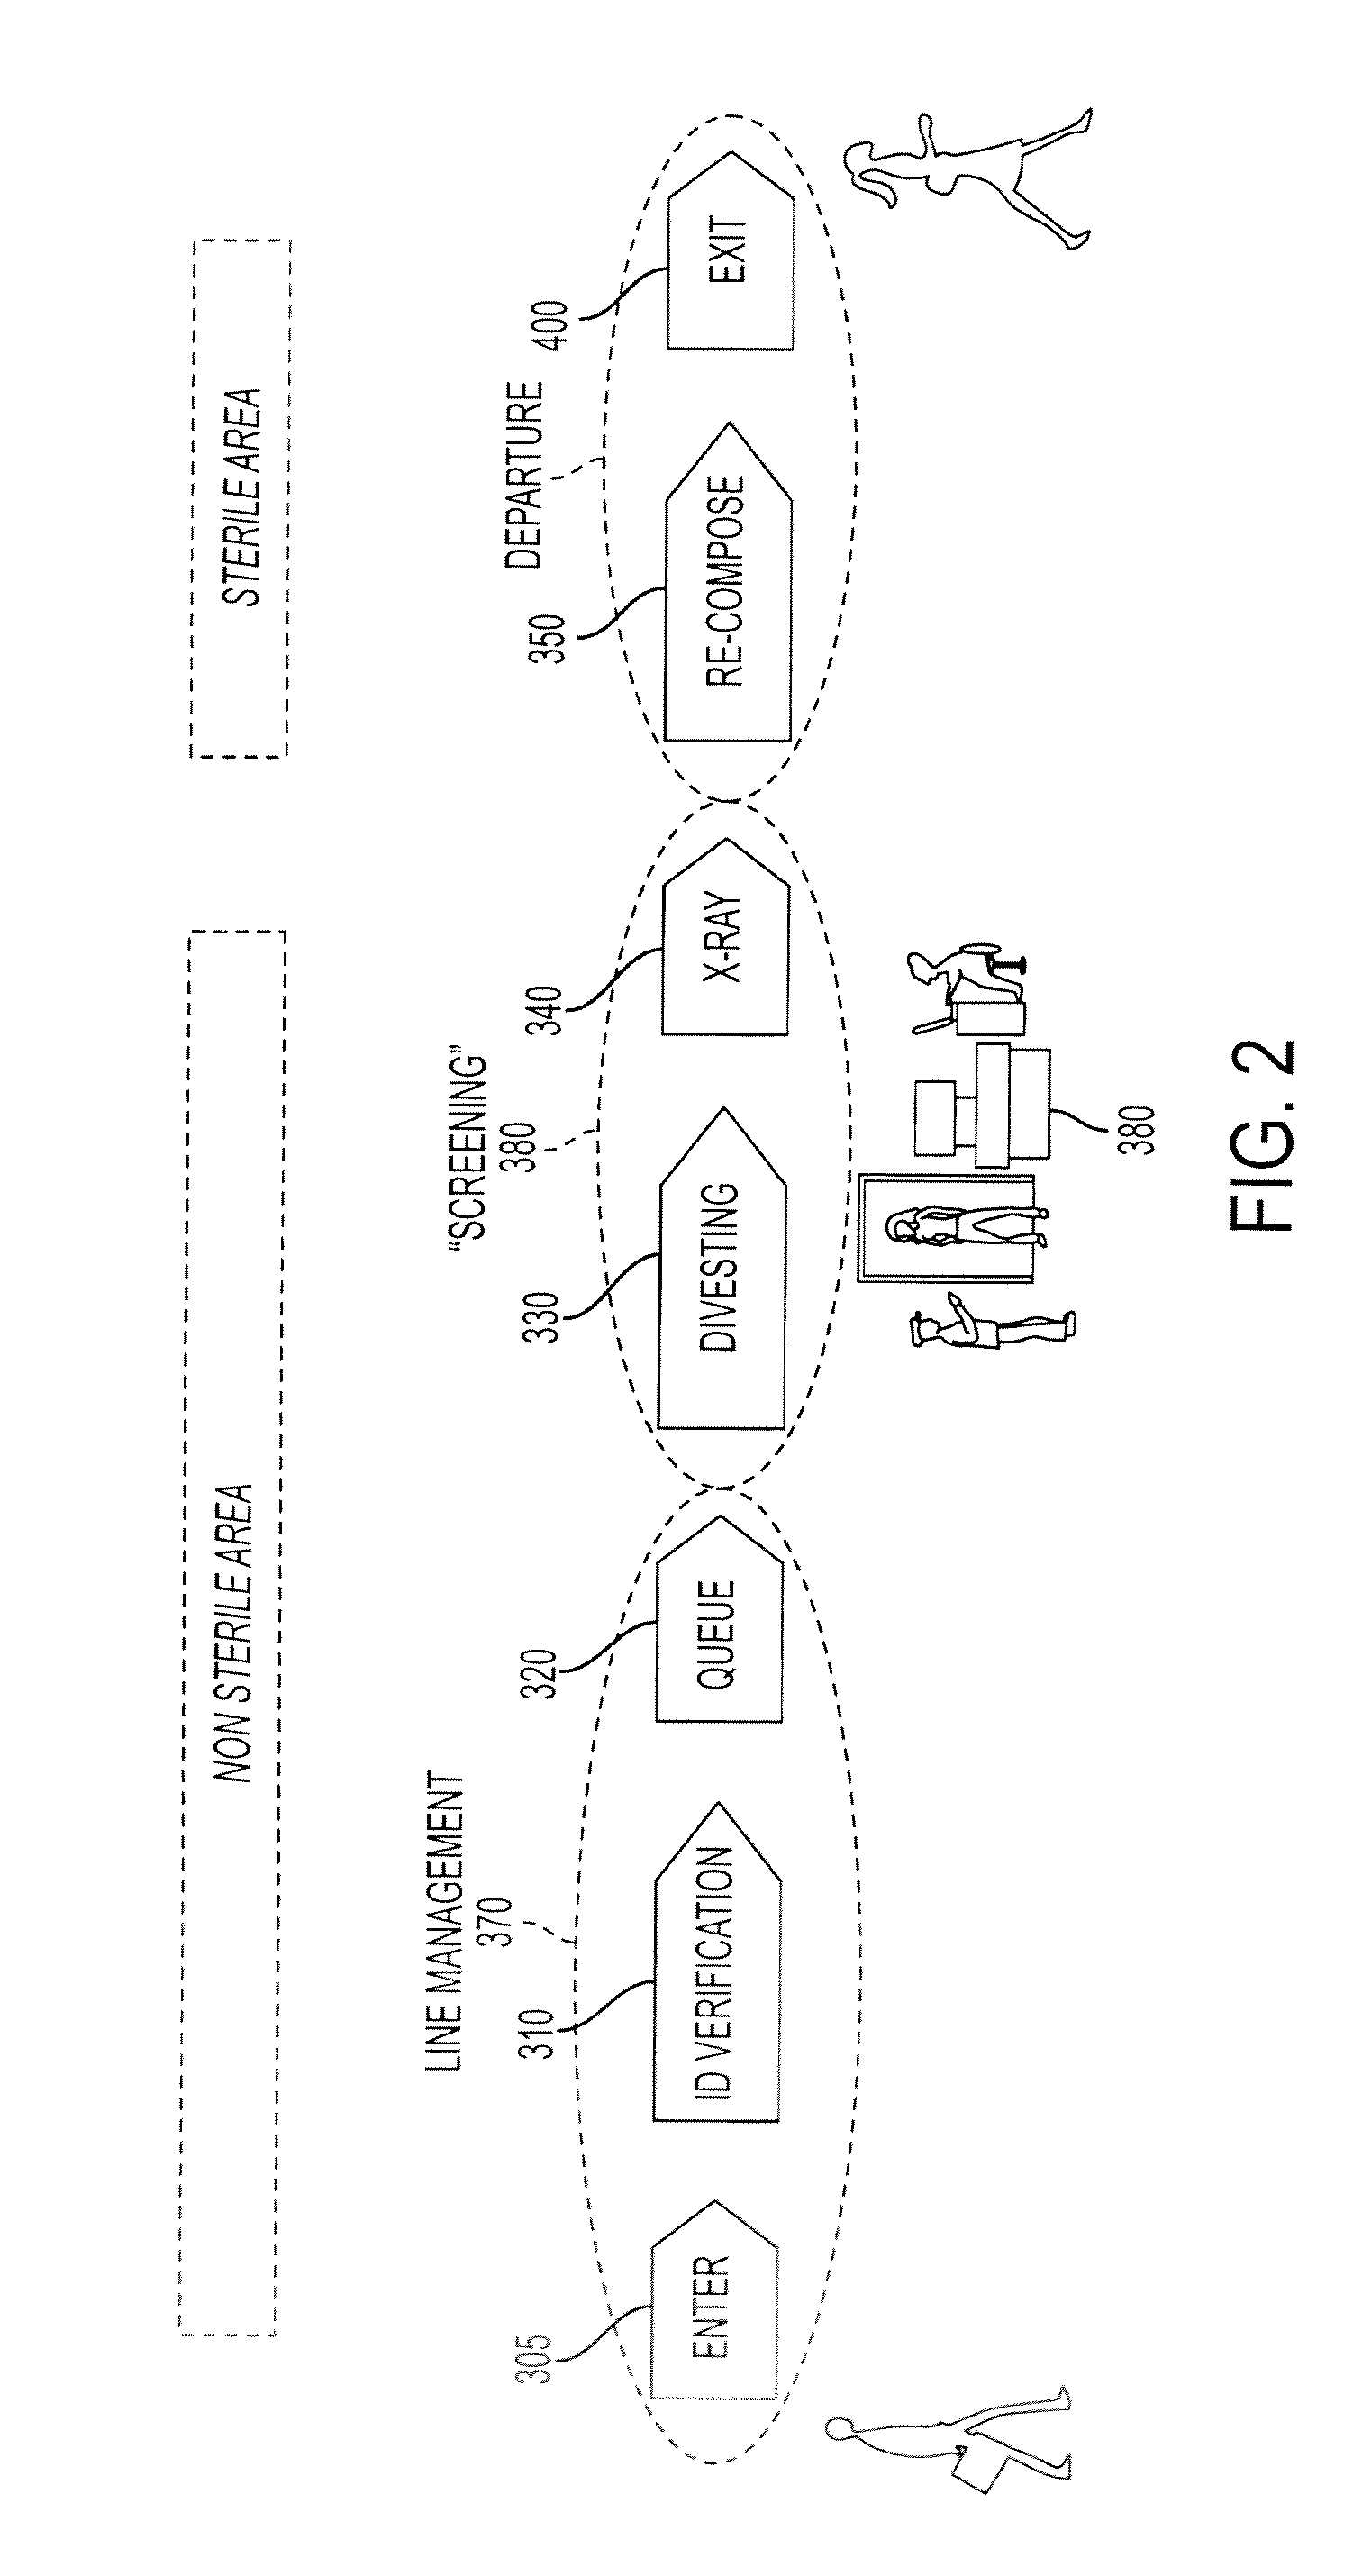 Methods and systems for efficient security screening